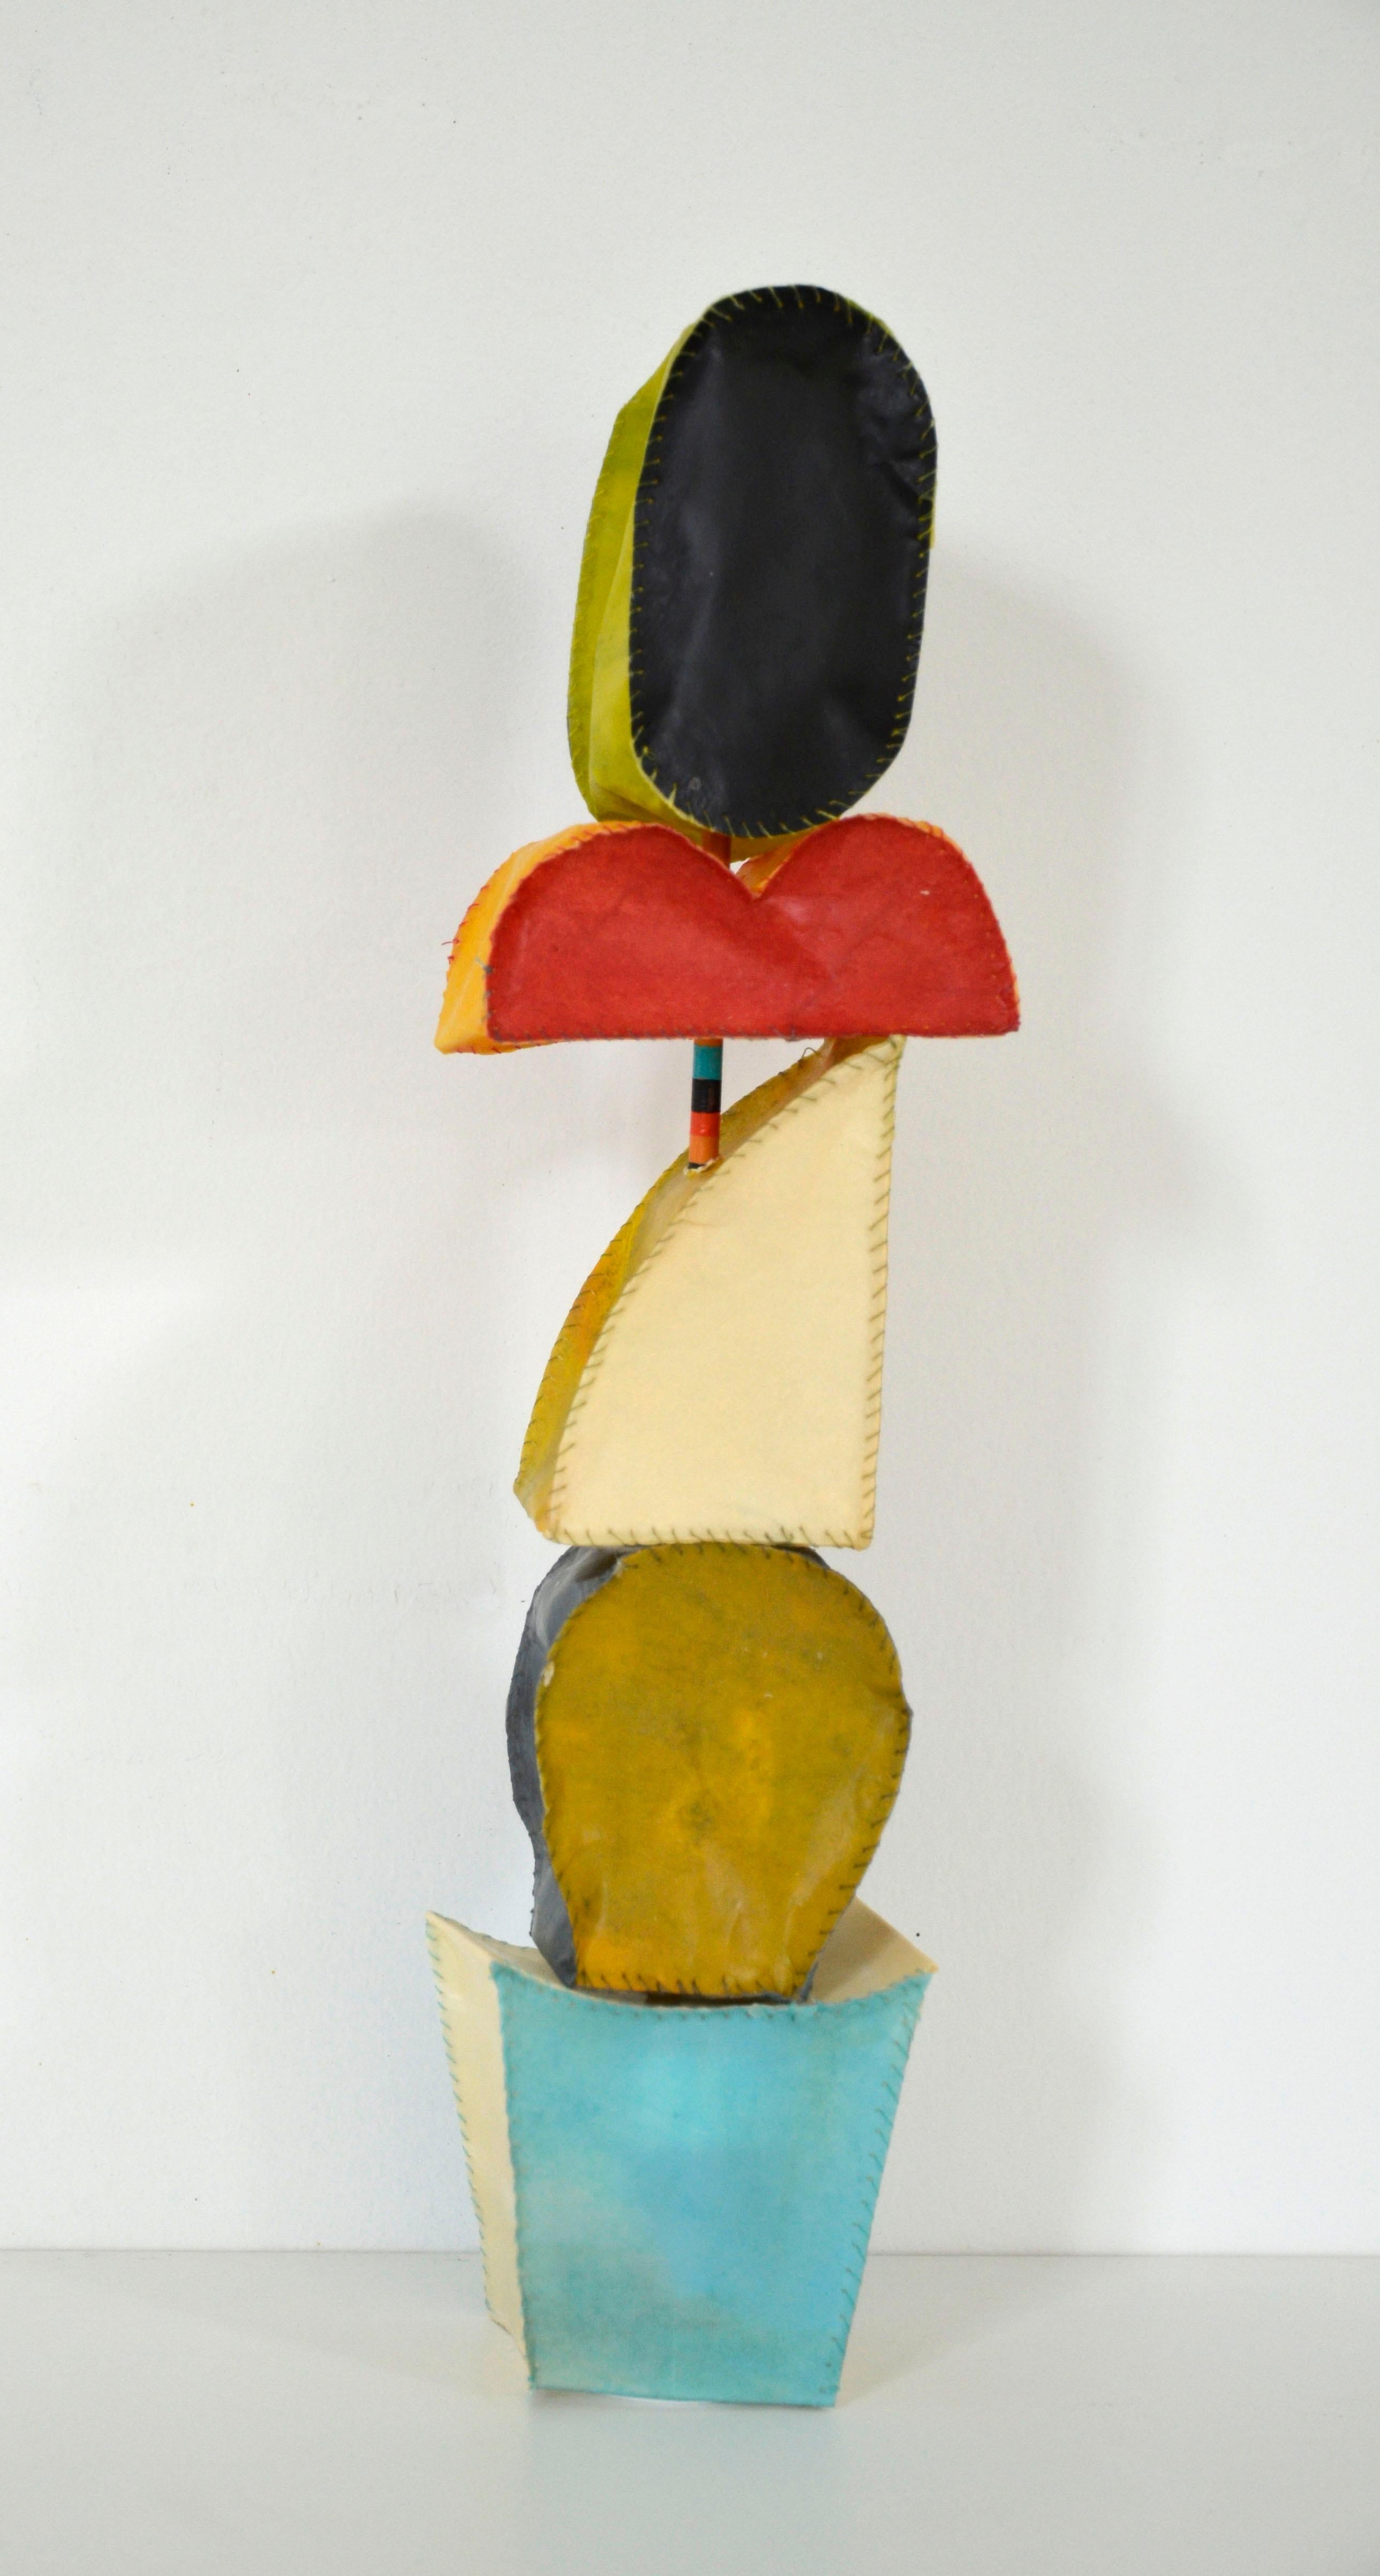 Donise English Abstract Sculpture – Play Tower #3 (Colorful Abstract Standing Sculpture in Blau, Beige, Rot & Schwarz)